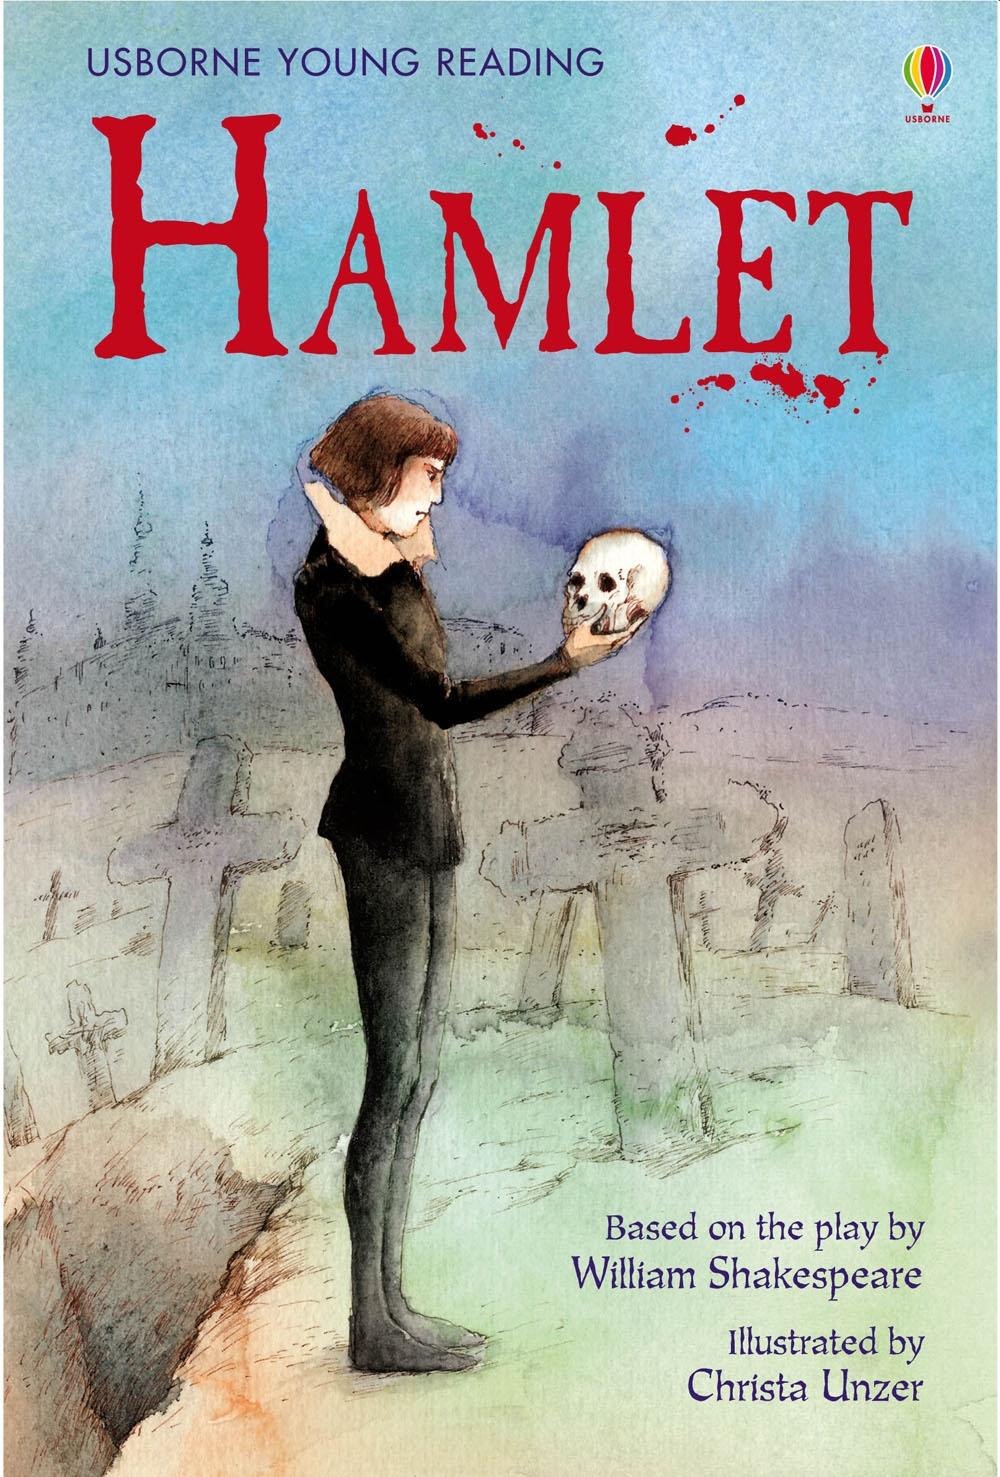 Hamlet / Louie Stowell / Buch / Young Reading Series 2 / 64 S. / Englisch / 2009 / Usborne Publishing Ltd / EAN 9780746096116 - Stowell, Louie